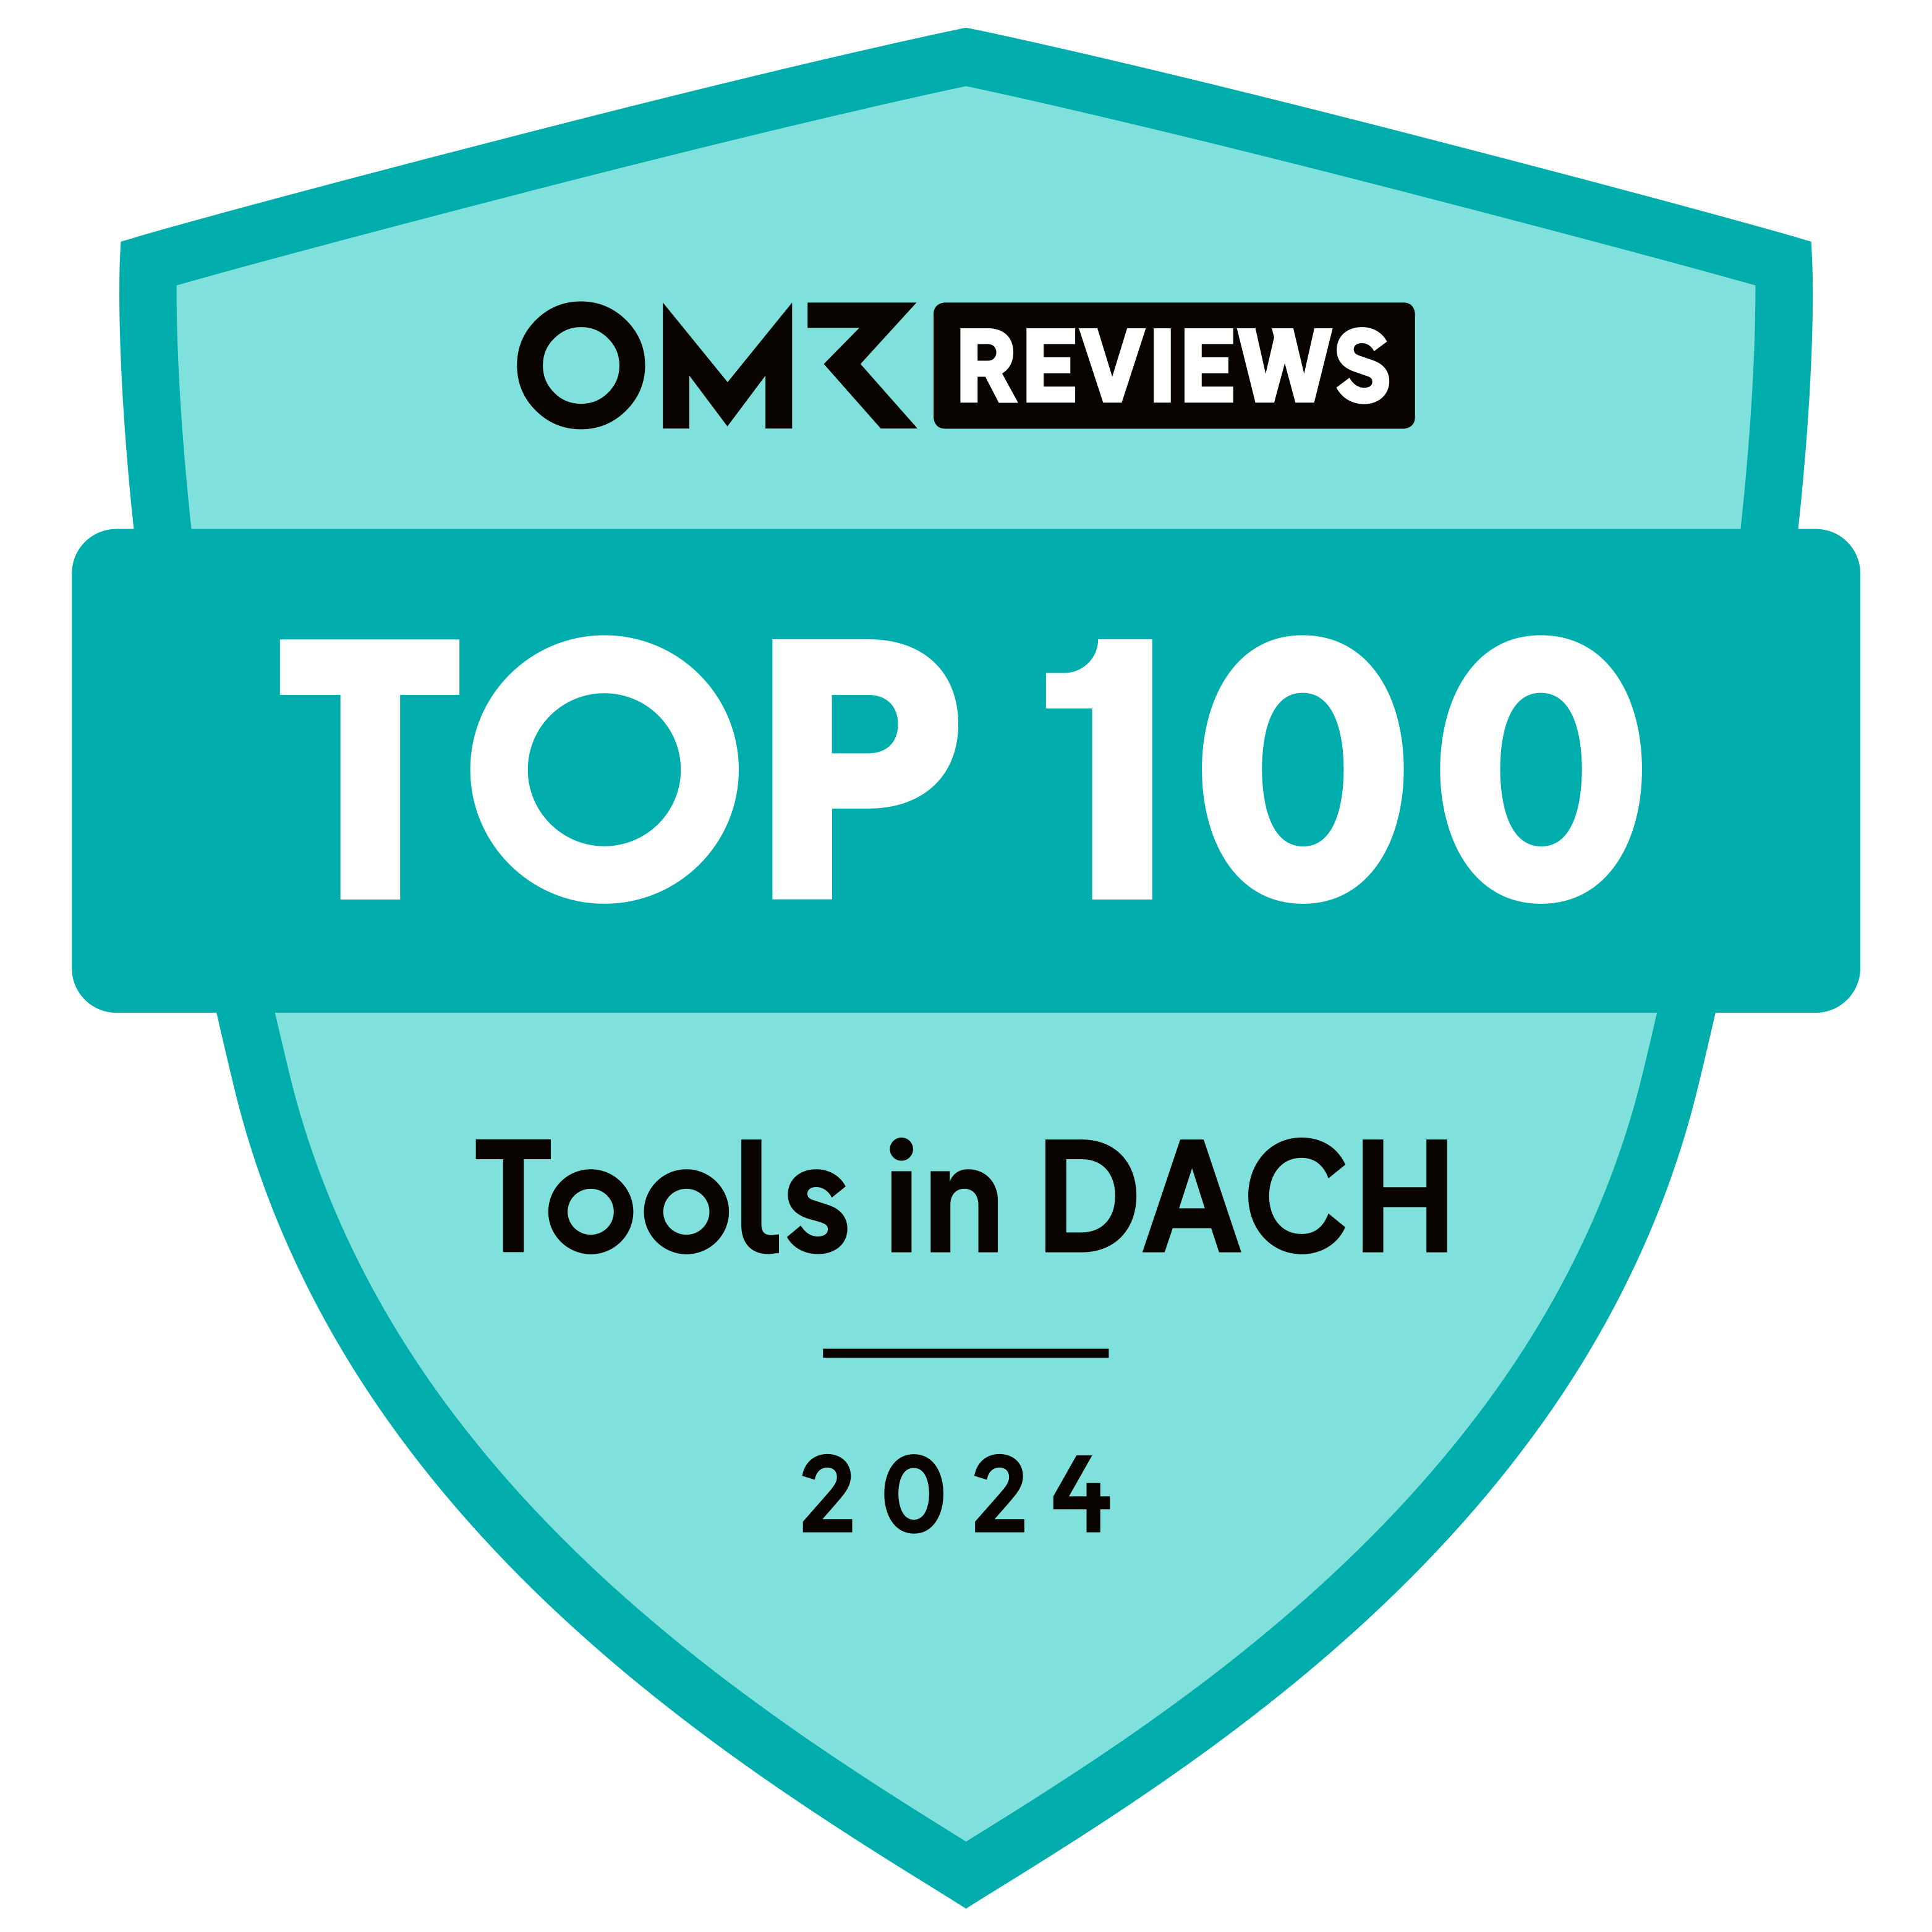 OMR Reviews | Top 100 Tools in DACH